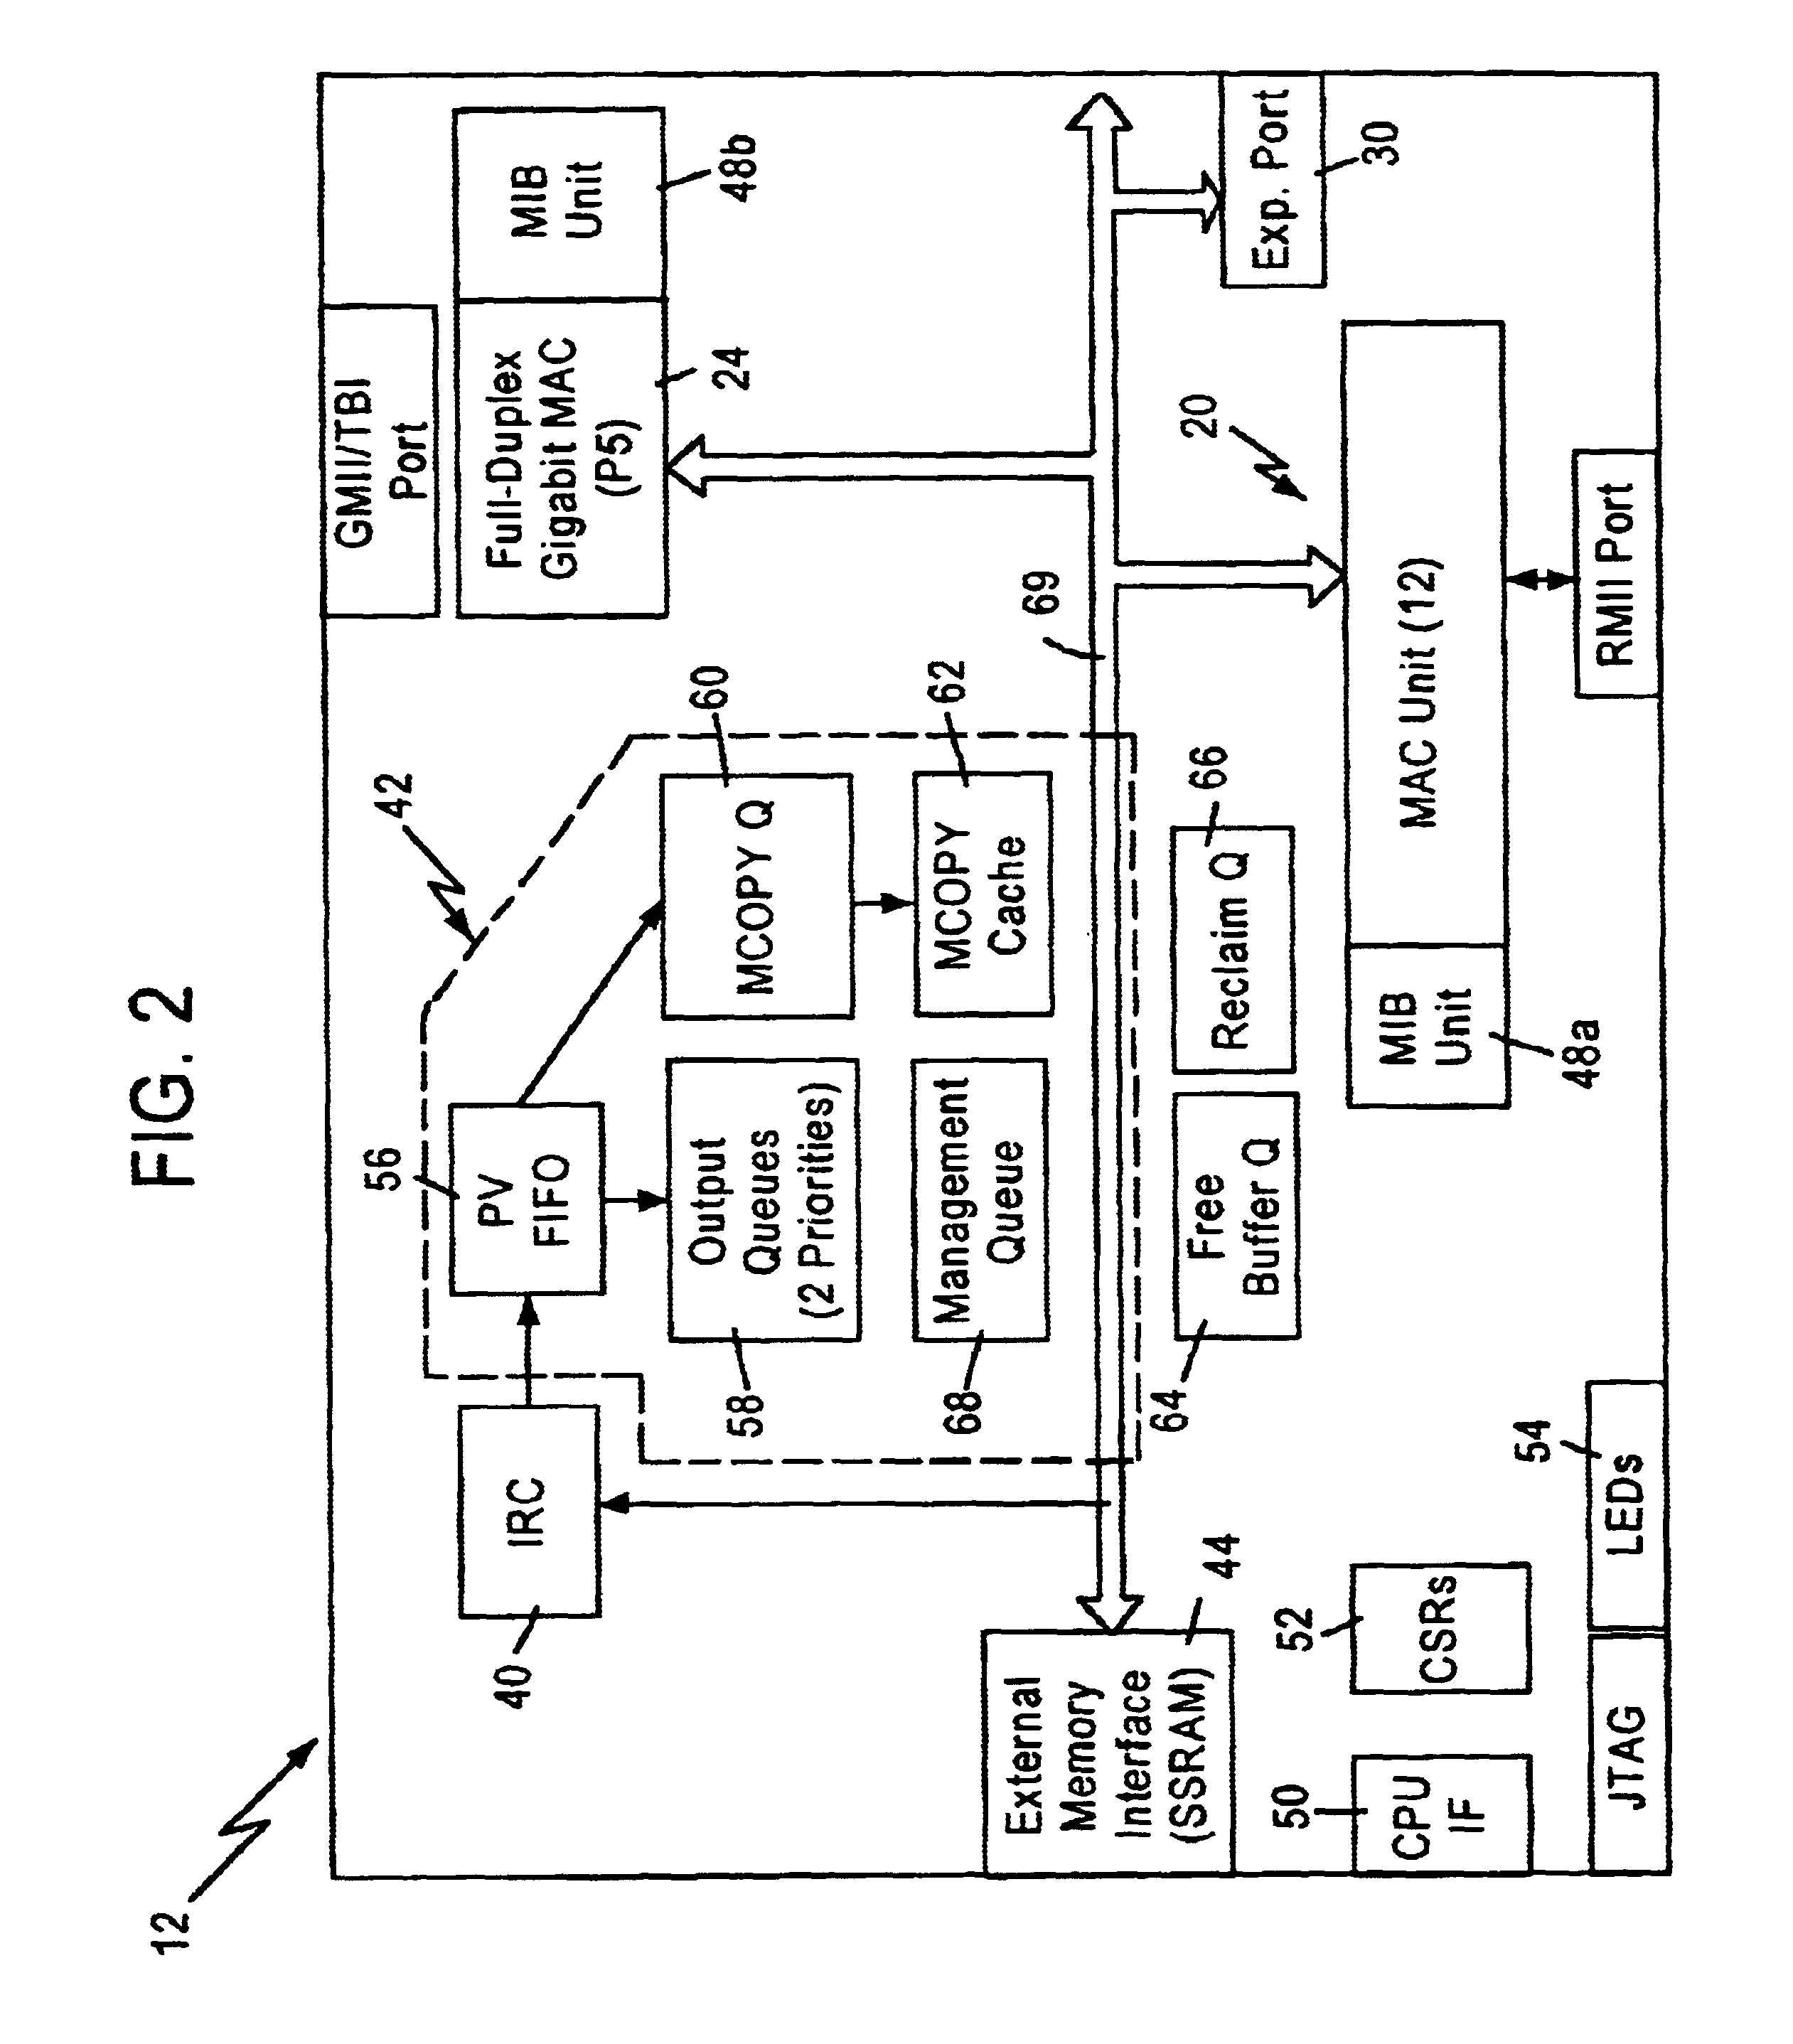 Method and apparatus for operating a network switch in a CPU-less environment